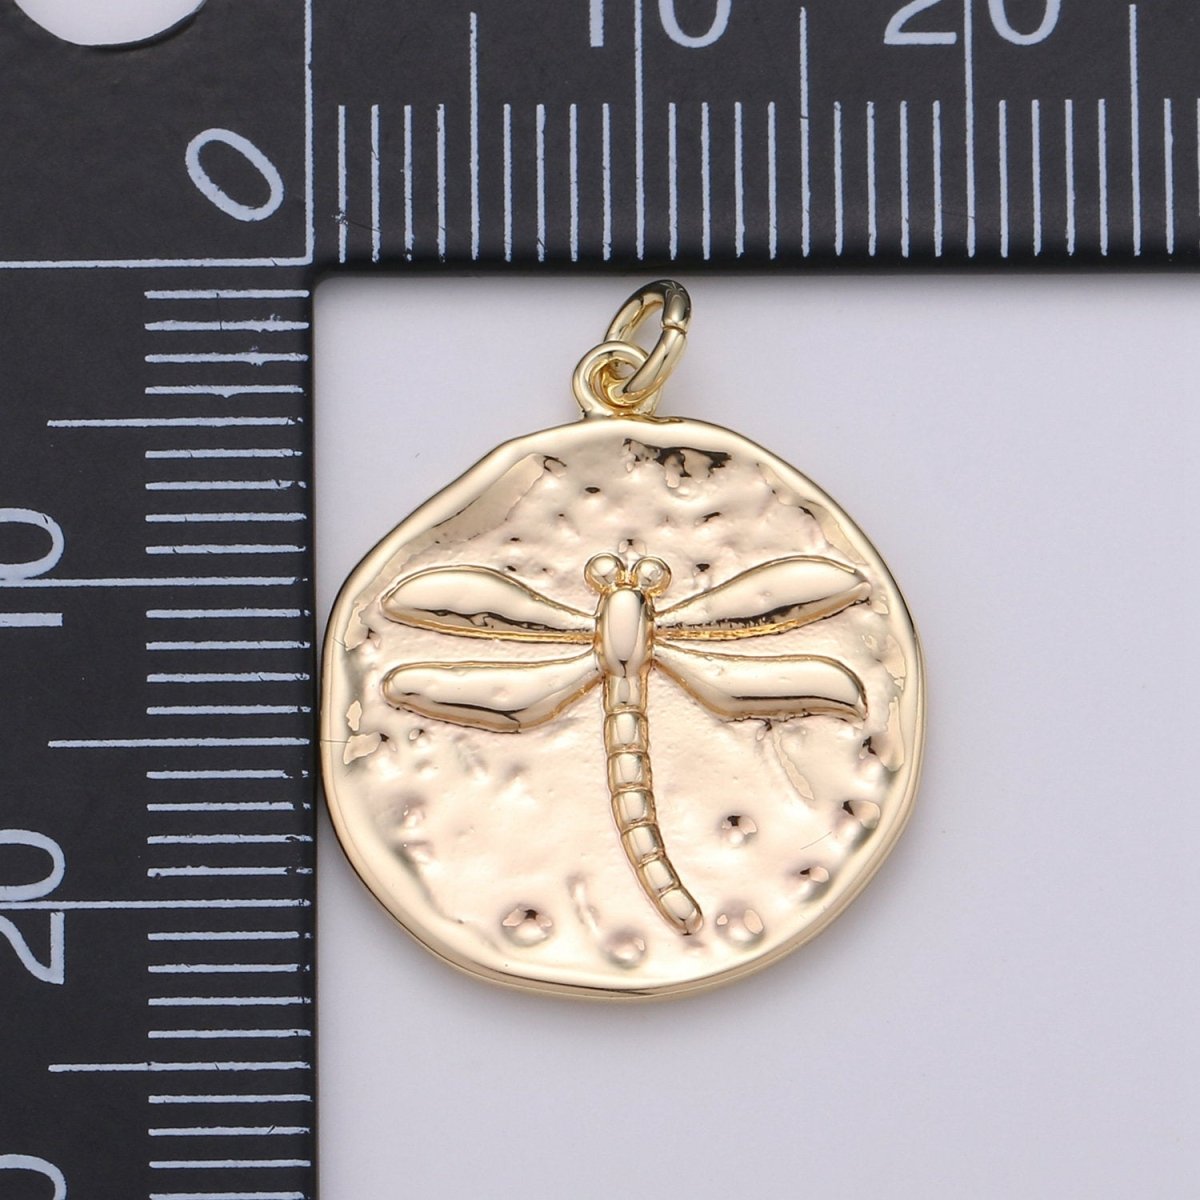 Rustic Coin Charm 14k Gold Filled coin pendant, Medallion charms Dragon Fly coin charms, Insect Disc Charm for Necklace Bracelet Earring D-389 - DLUXCA